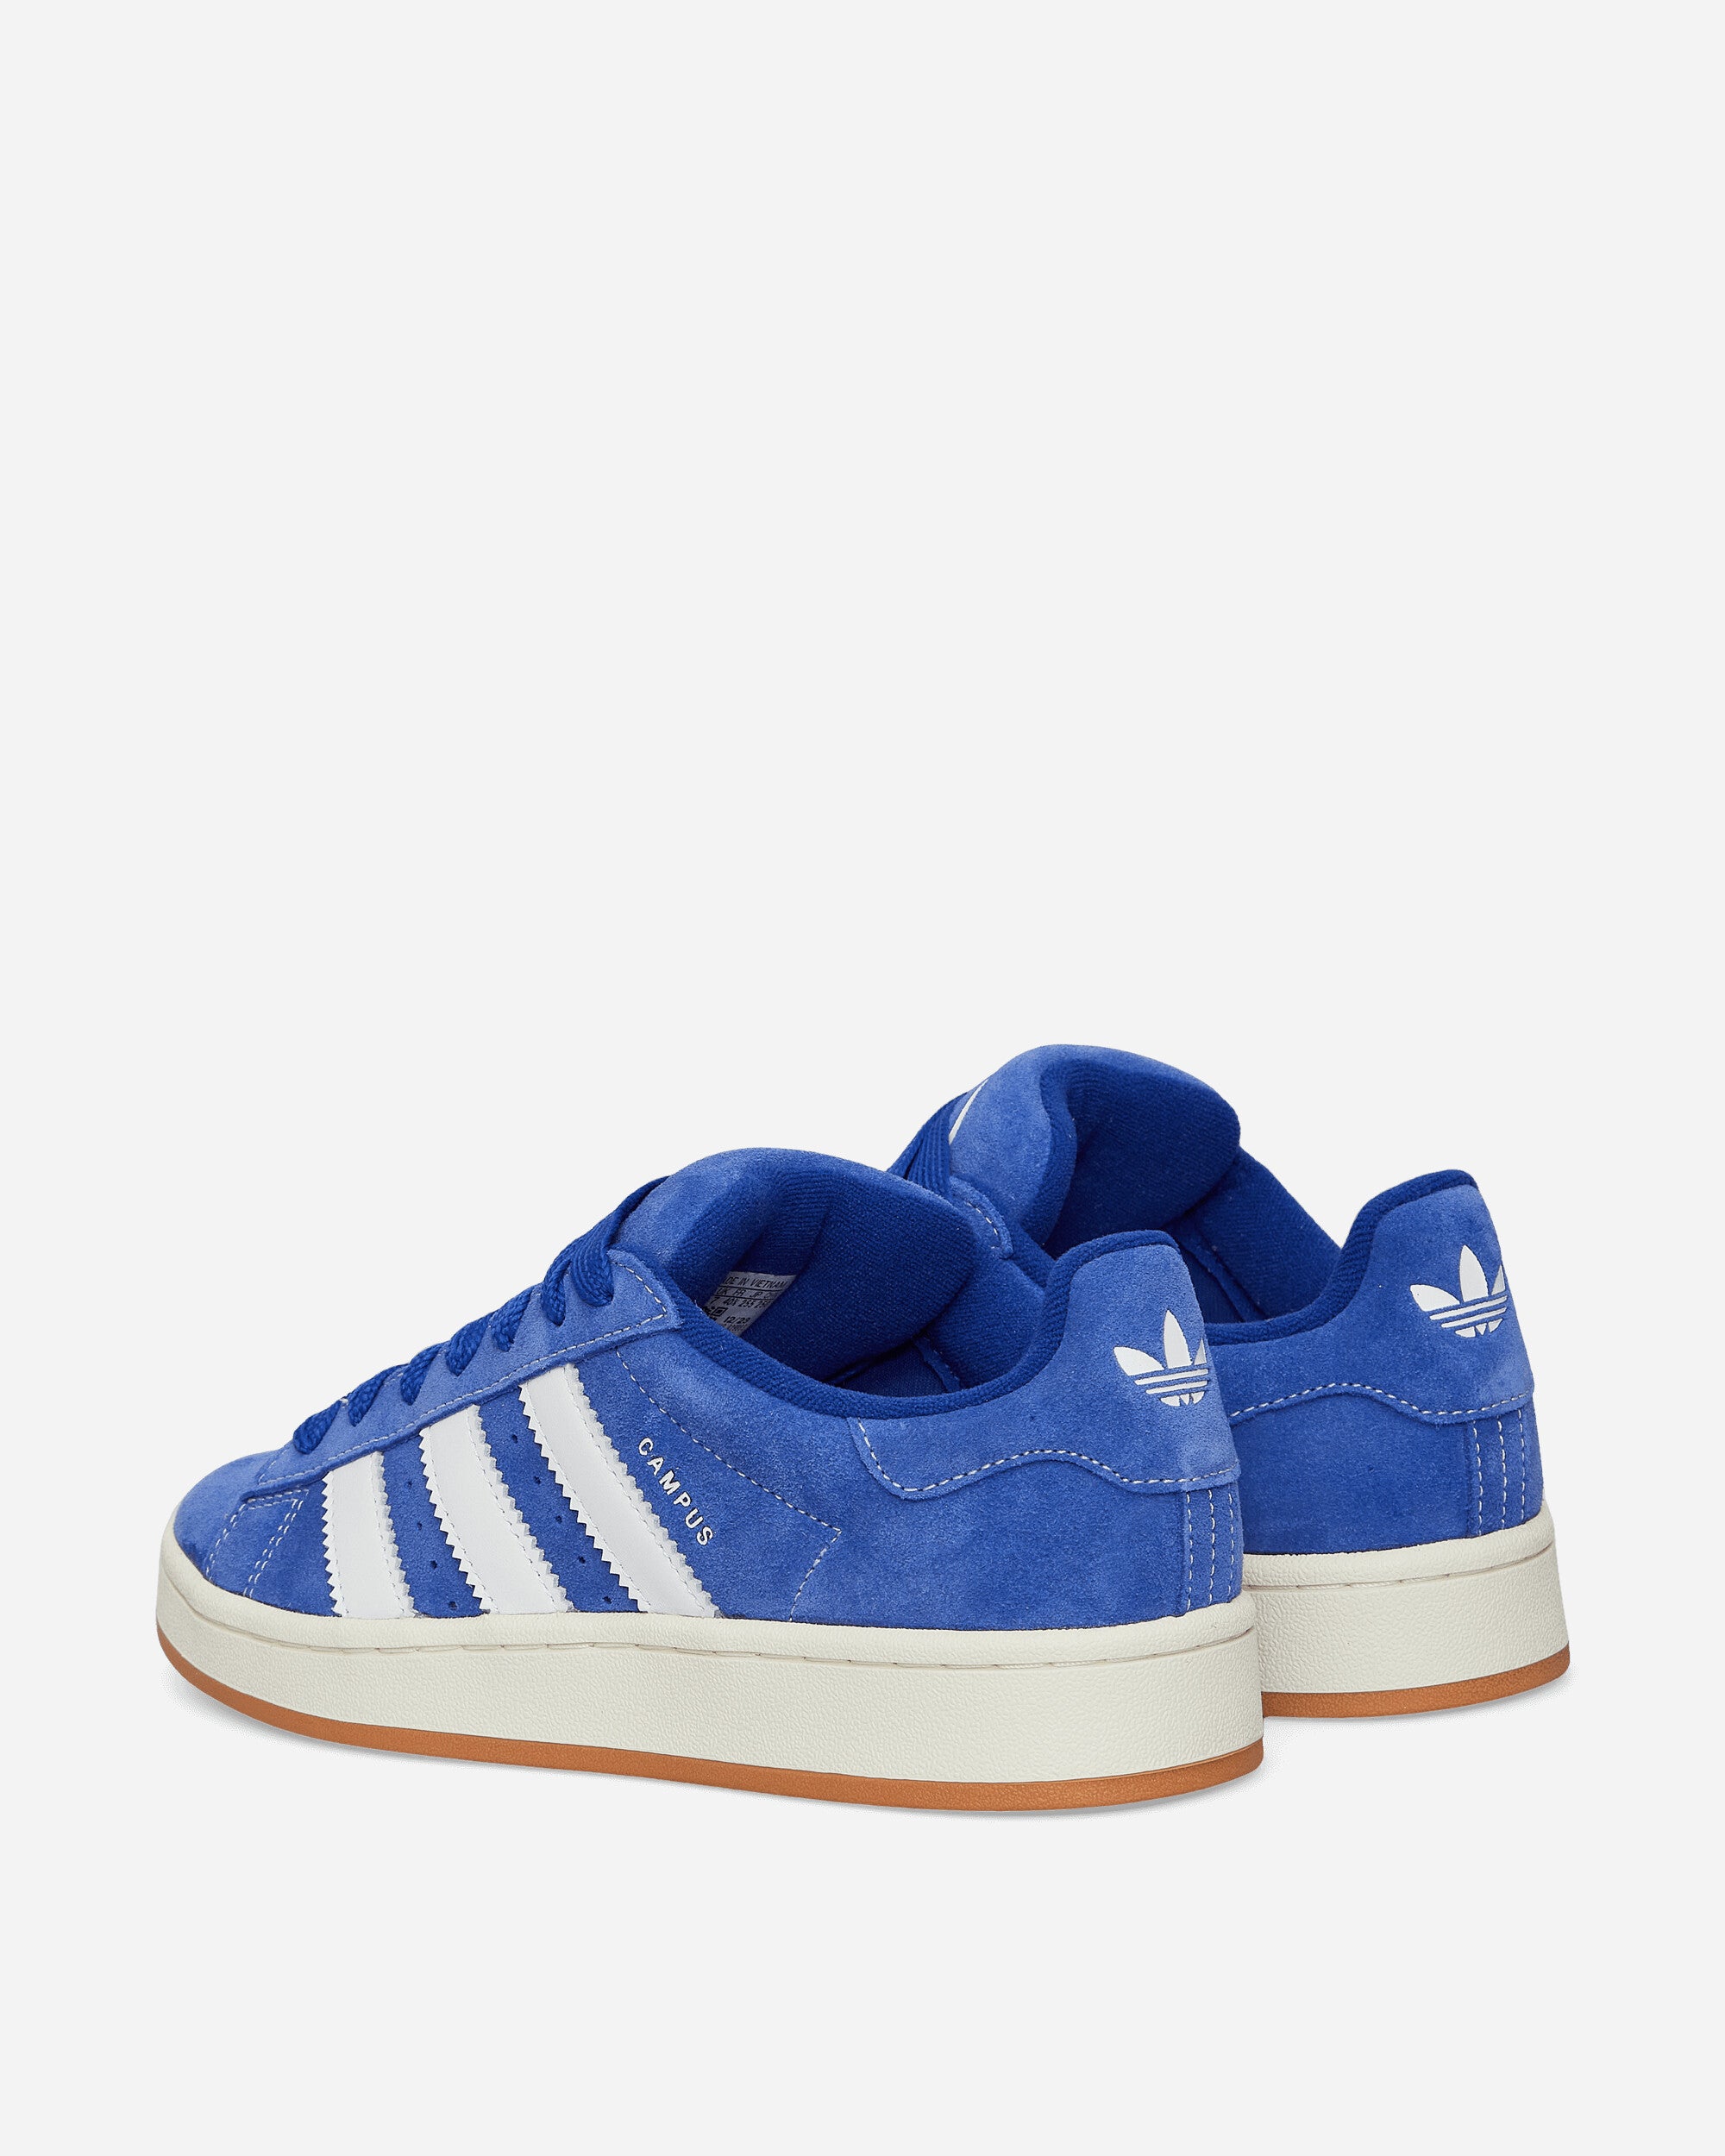 adidas Campus 00S Lucid Blue/Ftwr White Sneakers Low H03471 001